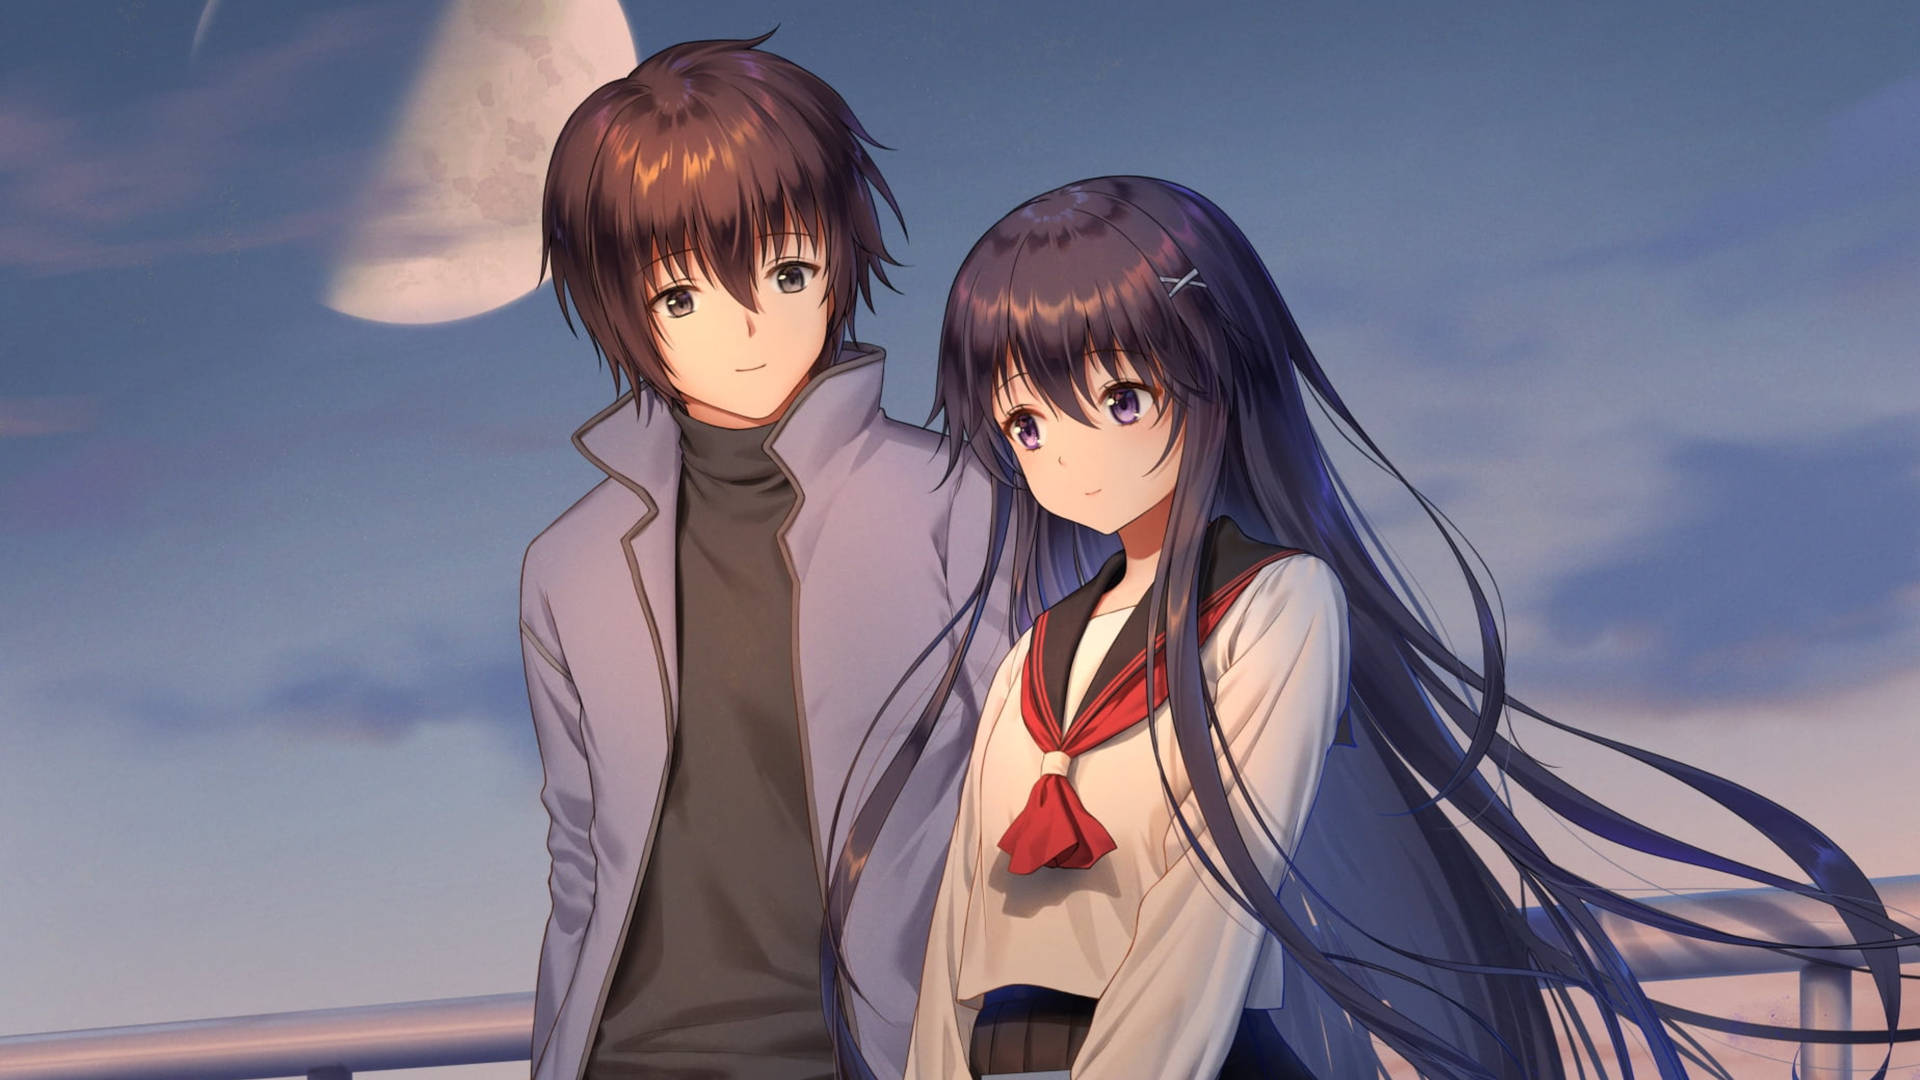 Cute Anime Couple Under Moon Background